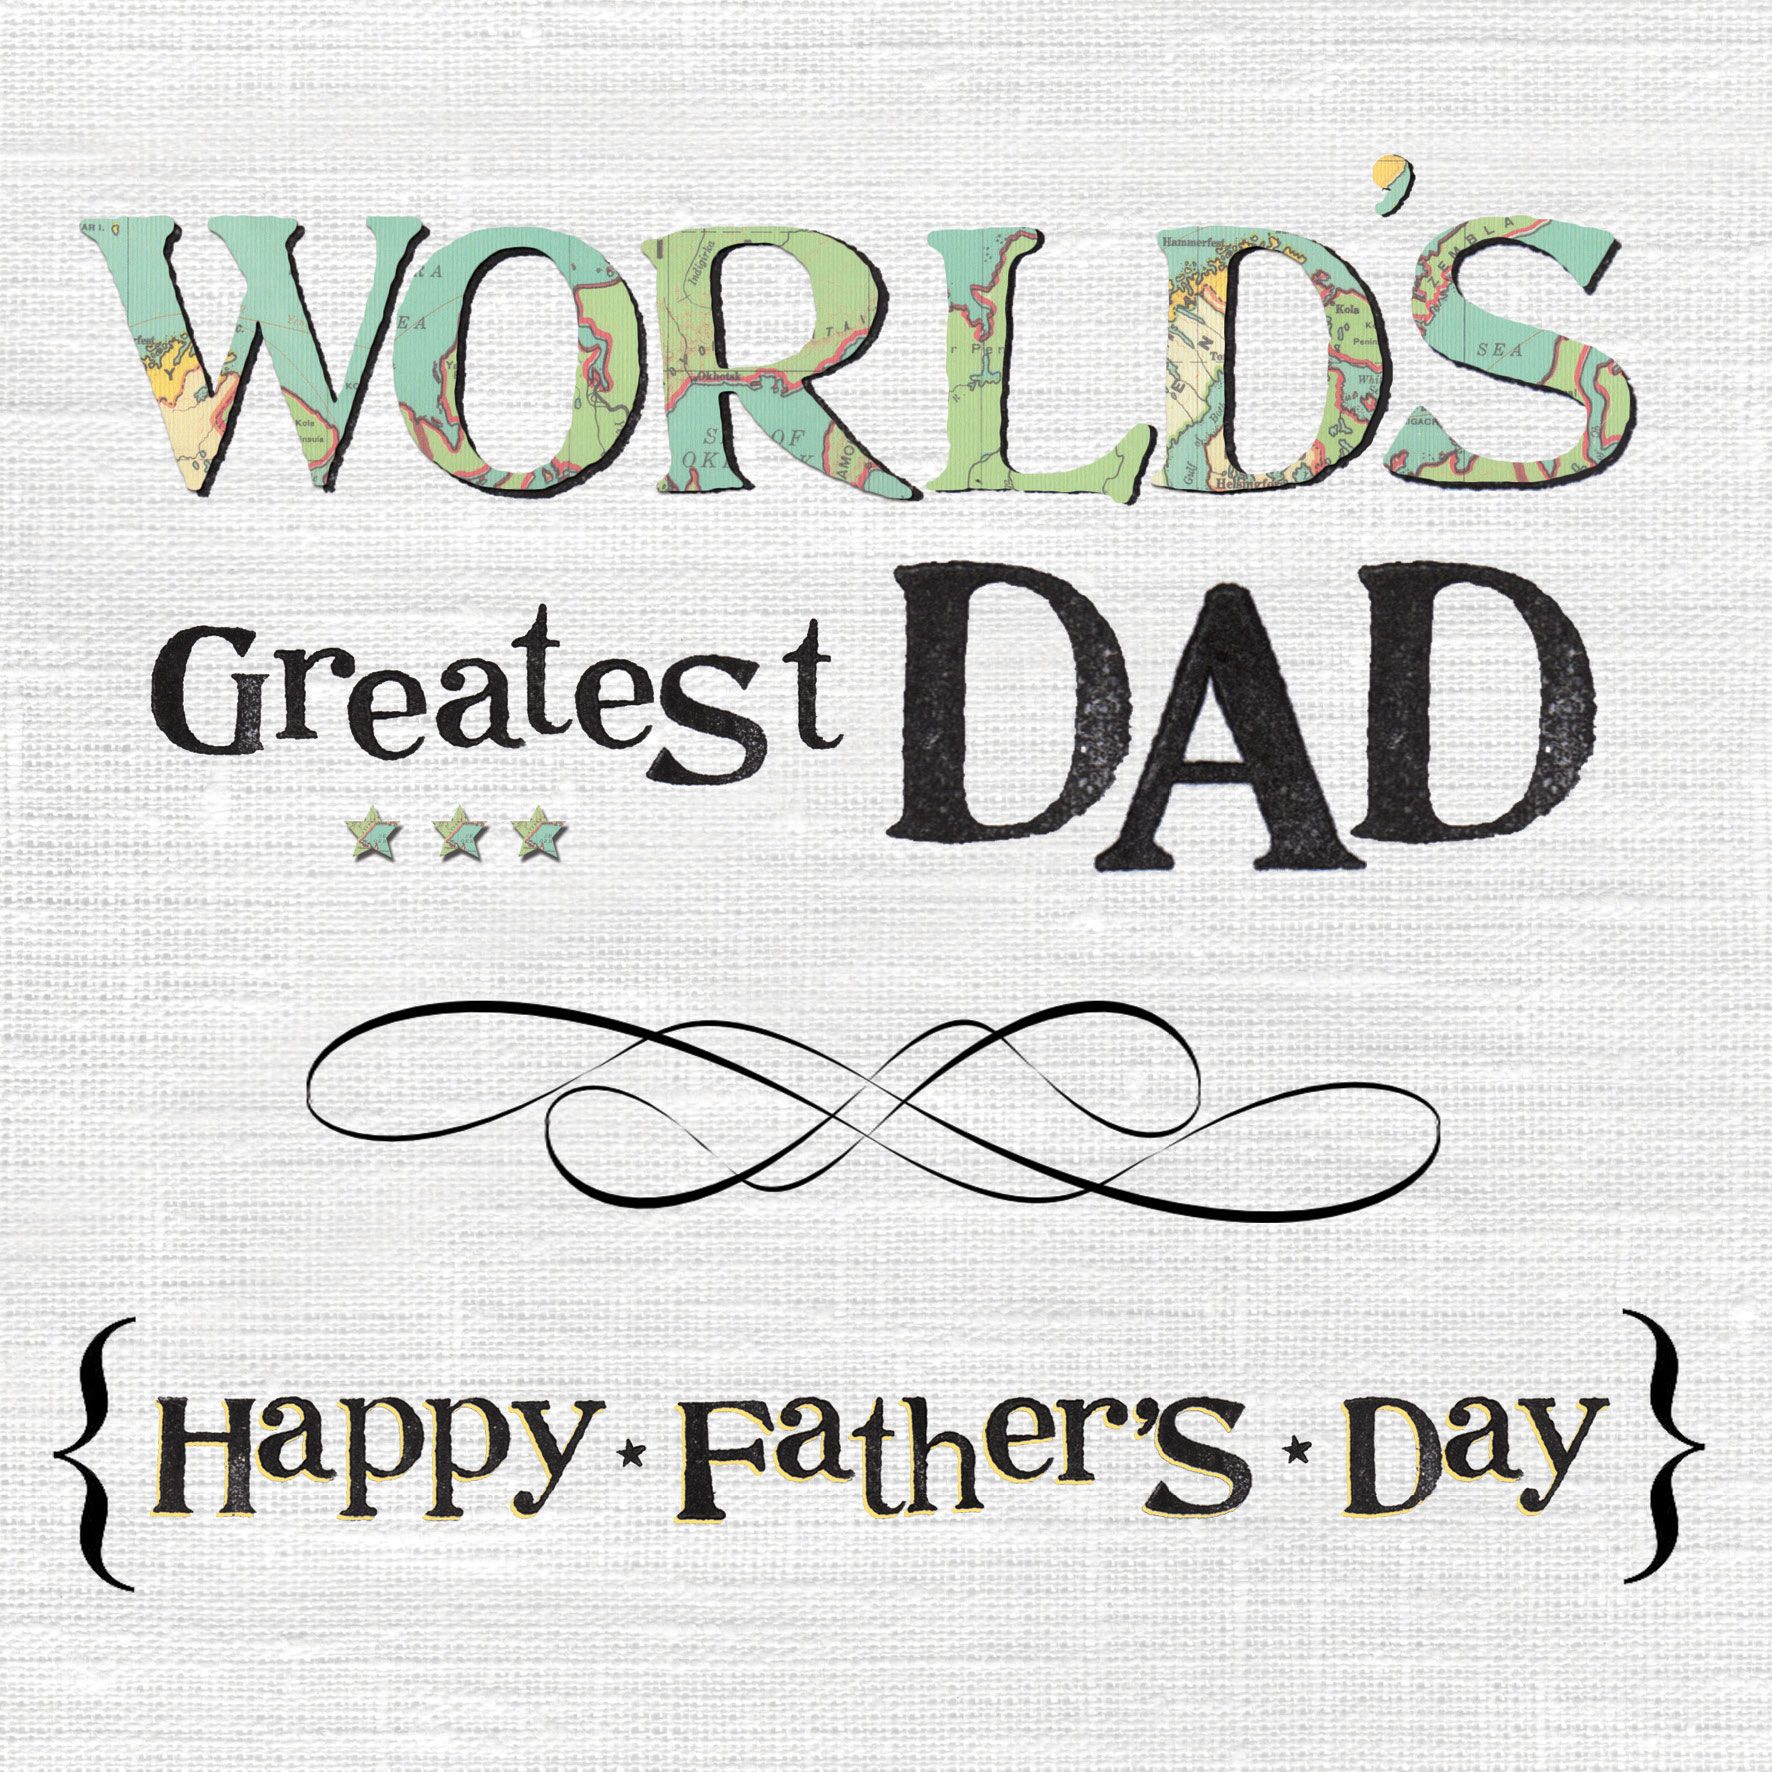 Happy Fathers Day Wallpaper, Quotes, Wishes, SMS